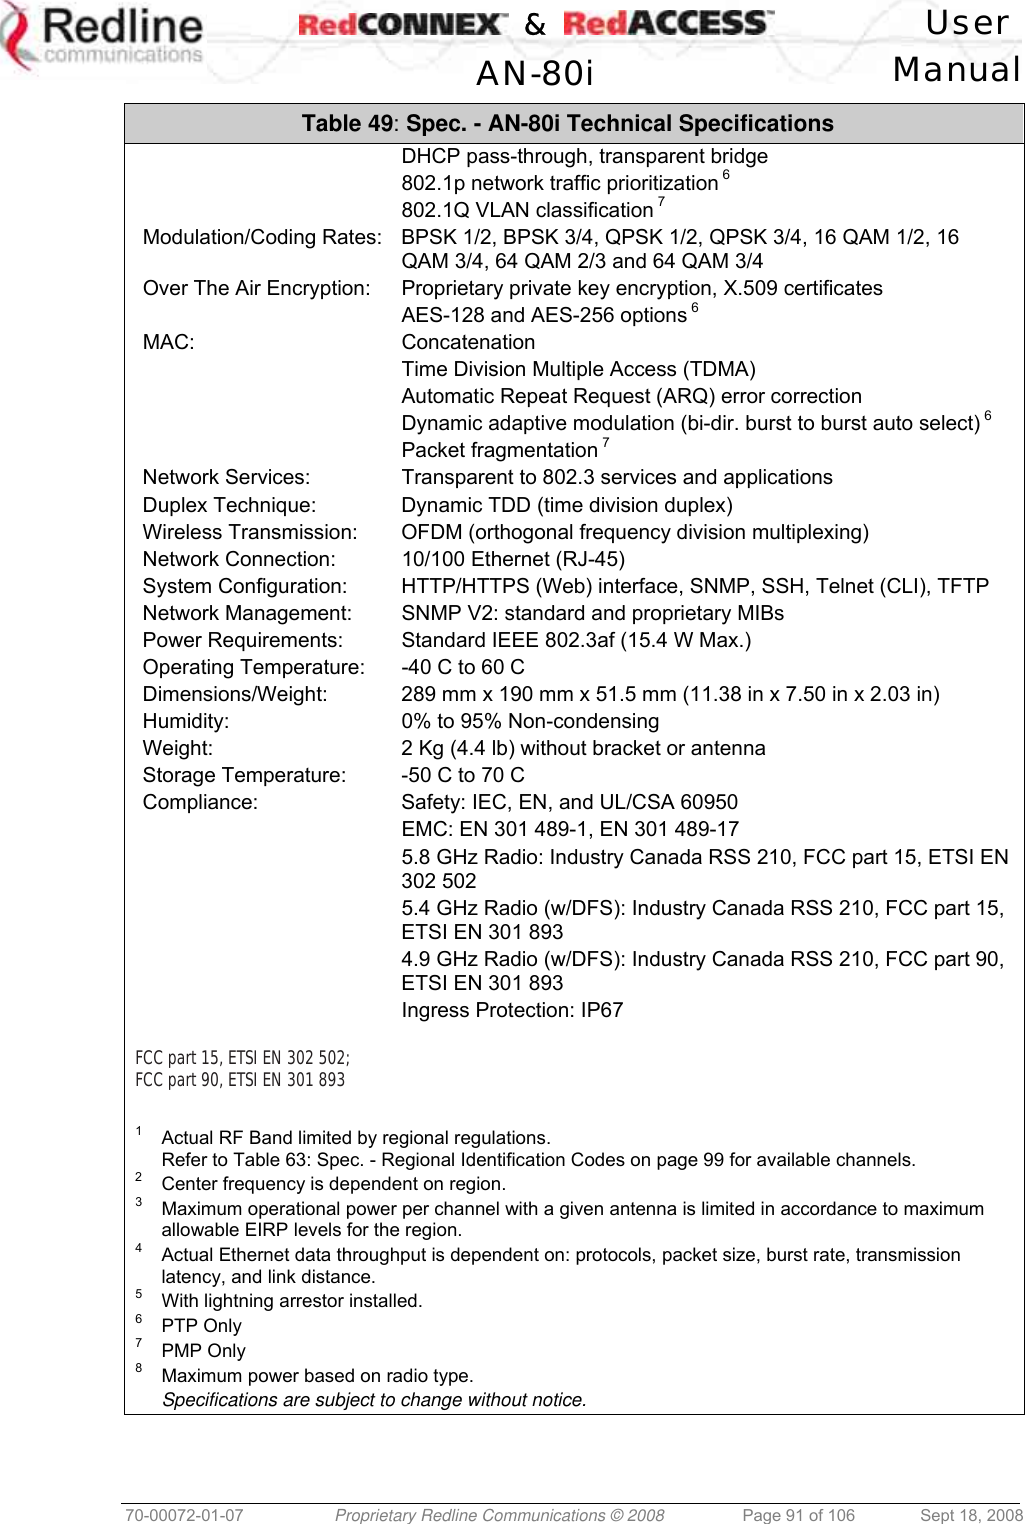    &amp;  User  AN-80i Manual  70-00072-01-07  Proprietary Redline Communications © 2008  Page 91 of 106  Sept 18, 2008 Table 49: Spec. - AN-80i Technical Specifications   DHCP pass-through, transparent bridge   802.1p network traffic prioritization 6   802.1Q VLAN classification 7 Modulation/Coding Rates:  BPSK 1/2, BPSK 3/4, QPSK 1/2, QPSK 3/4, 16 QAM 1/2, 16 QAM 3/4, 64 QAM 2/3 and 64 QAM 3/4 Over The Air Encryption:  Proprietary private key encryption, X.509 certificates   AES-128 and AES-256 options 6 MAC: Concatenation   Time Division Multiple Access (TDMA)   Automatic Repeat Request (ARQ) error correction   Dynamic adaptive modulation (bi-dir. burst to burst auto select) 6  Packet fragmentation 7 Network Services:  Transparent to 802.3 services and applications Duplex Technique:  Dynamic TDD (time division duplex) Wireless Transmission:  OFDM (orthogonal frequency division multiplexing) Network Connection:  10/100 Ethernet (RJ-45) System Configuration:  HTTP/HTTPS (Web) interface, SNMP, SSH, Telnet (CLI), TFTP Network Management:  SNMP V2: standard and proprietary MIBs Power Requirements:  Standard IEEE 802.3af (15.4 W Max.) Operating Temperature:  -40 C to 60 C Dimensions/Weight:  289 mm x 190 mm x 51.5 mm (11.38 in x 7.50 in x 2.03 in) Humidity:  0% to 95% Non-condensing Weight:  2 Kg (4.4 lb) without bracket or antenna Storage Temperature:  -50 C to 70 C Compliance:  Safety: IEC, EN, and UL/CSA 60950   EMC: EN 301 489-1, EN 301 489-17   5.8 GHz Radio: Industry Canada RSS 210, FCC part 15, ETSI EN 302 502   5.4 GHz Radio (w/DFS): Industry Canada RSS 210, FCC part 15, ETSI EN 301 893   4.9 GHz Radio (w/DFS): Industry Canada RSS 210, FCC part 90, ETSI EN 301 893   Ingress Protection: IP67  FCC part 15, ETSI EN 302 502; FCC part 90, ETSI EN 301 893   1   Actual RF Band limited by regional regulations. Refer to Table 63: Spec. - Regional Identification Codes on page 99 for available channels. 2   Center frequency is dependent on region. 3   Maximum operational power per channel with a given antenna is limited in accordance to maximum allowable EIRP levels for the region. 4   Actual Ethernet data throughput is dependent on: protocols, packet size, burst rate, transmission latency, and link distance. 5   With lightning arrestor installed. 6   PTP Only 7   PMP Only 8   Maximum power based on radio type.  Specifications are subject to change without notice.  